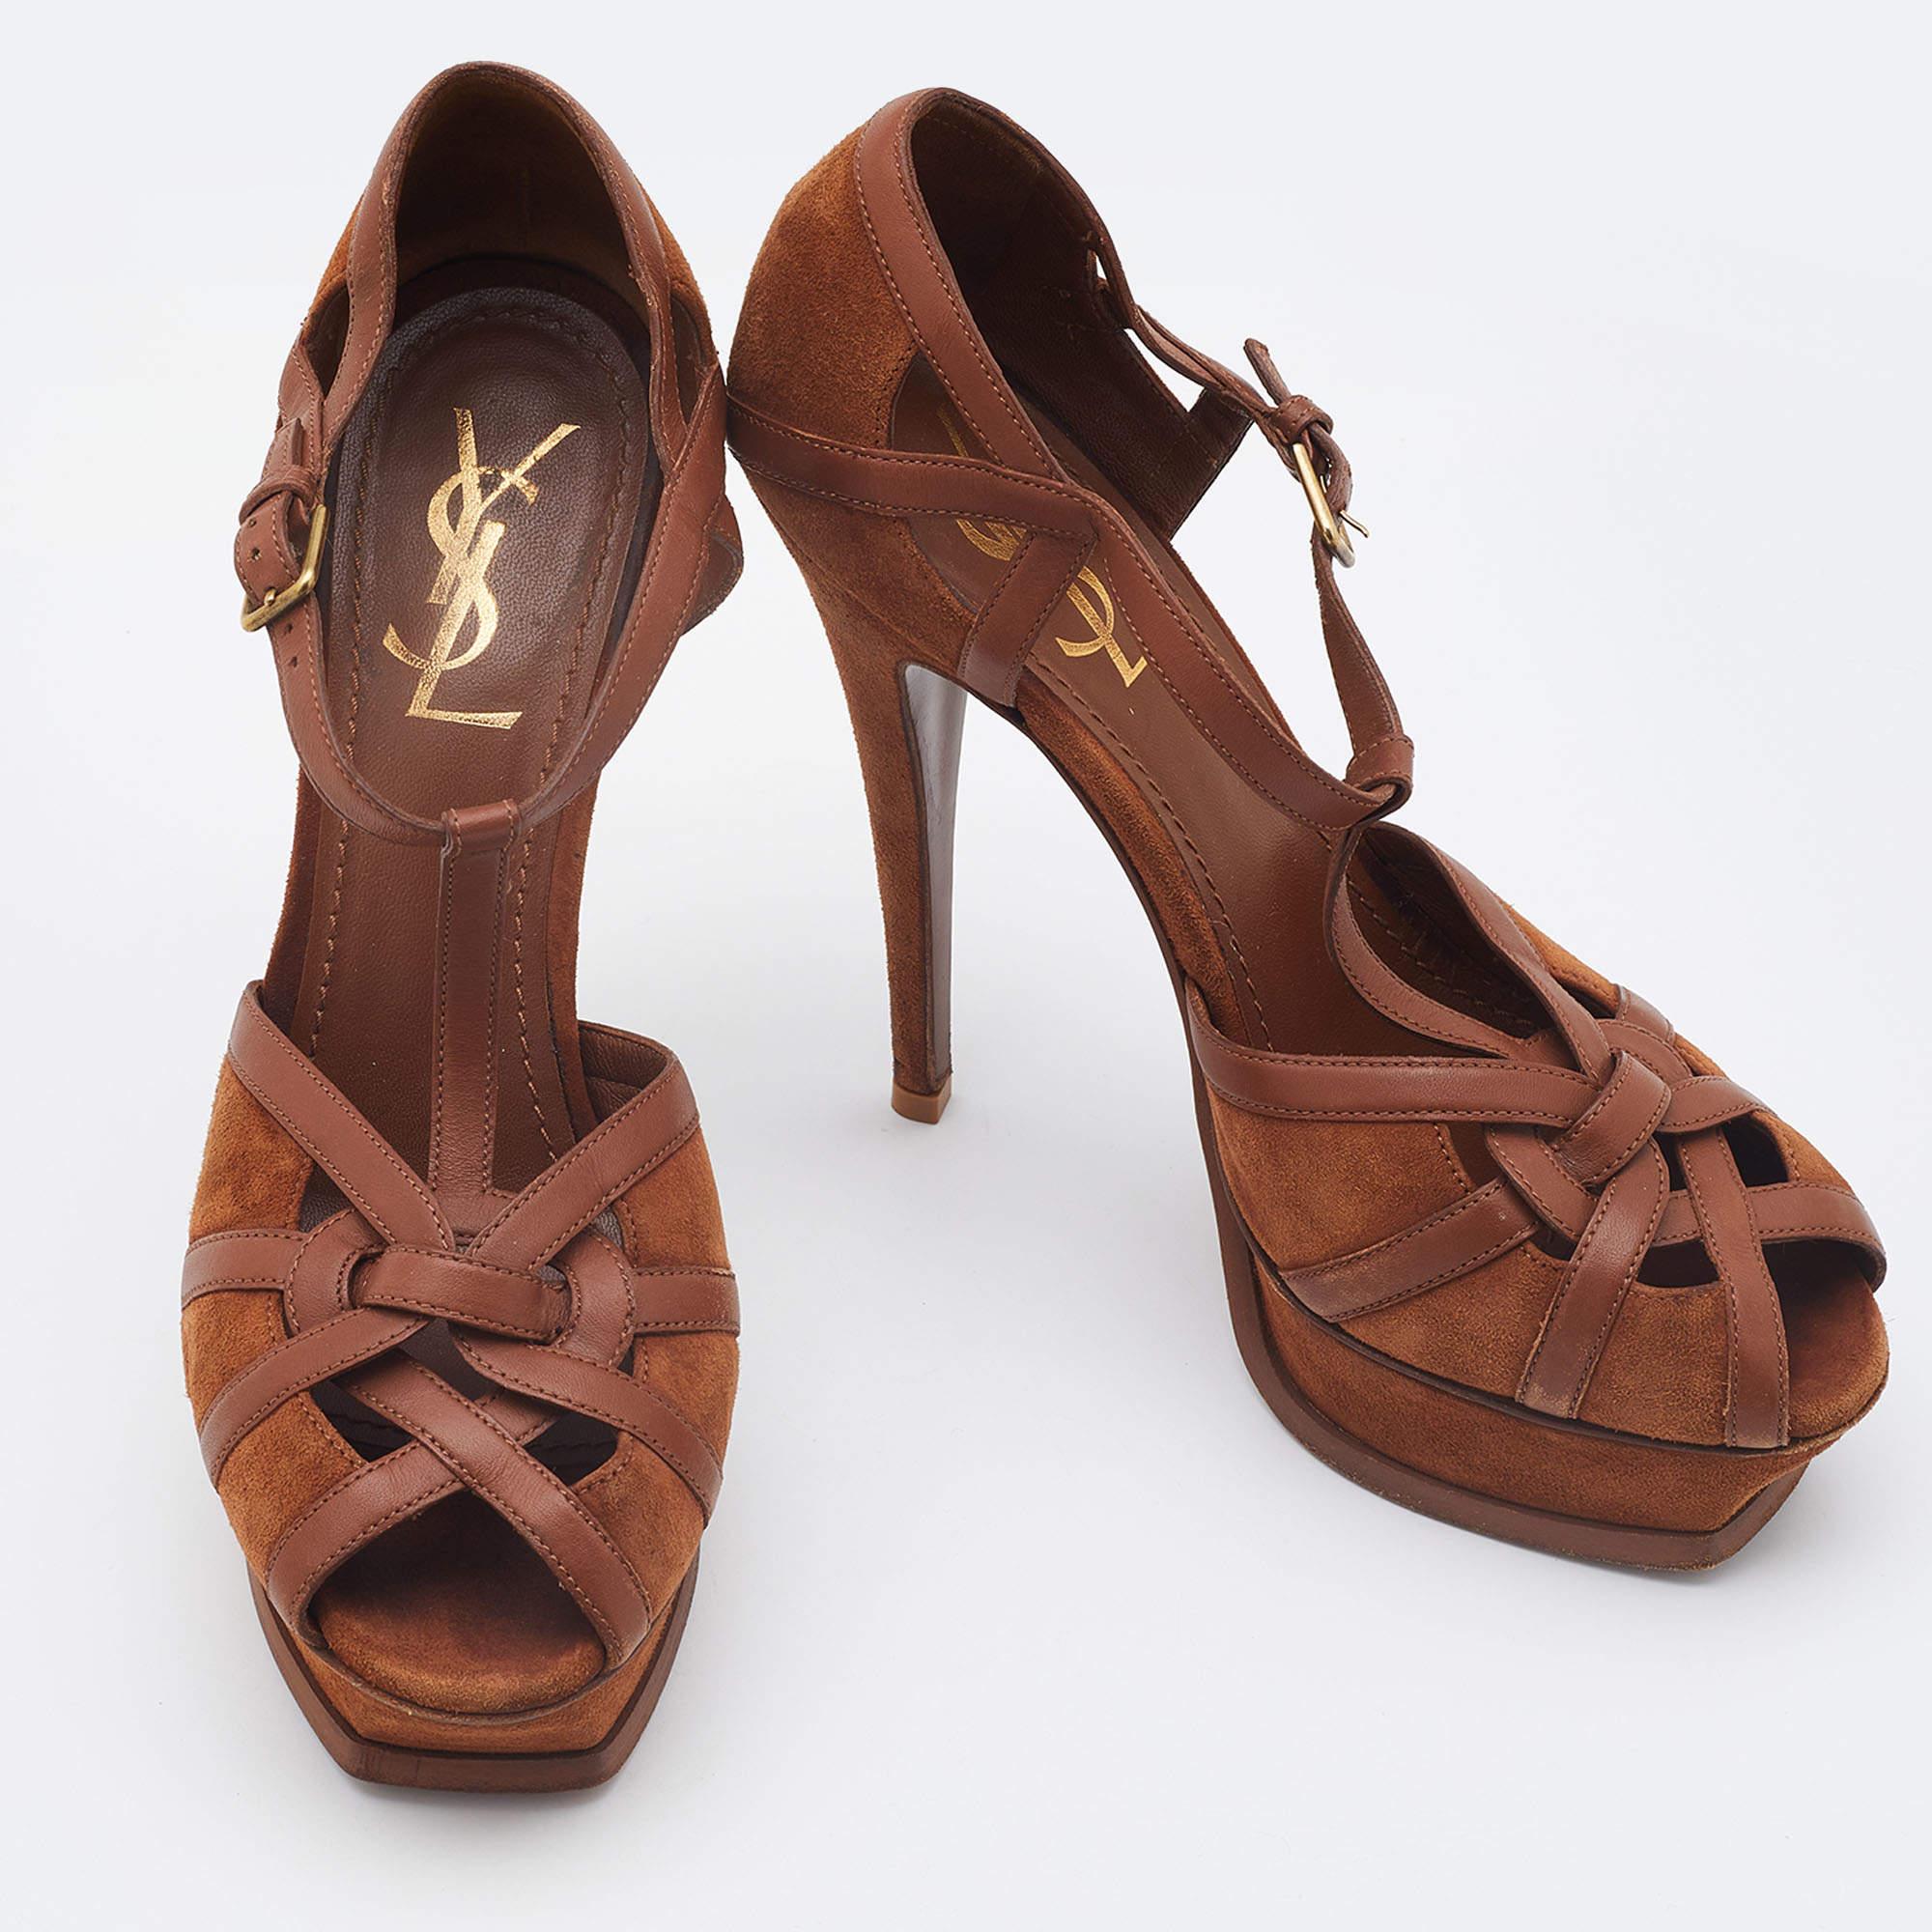 Yves Saint Laurent Brown Suede and Leather Tribute Sandals Size 38.5 1